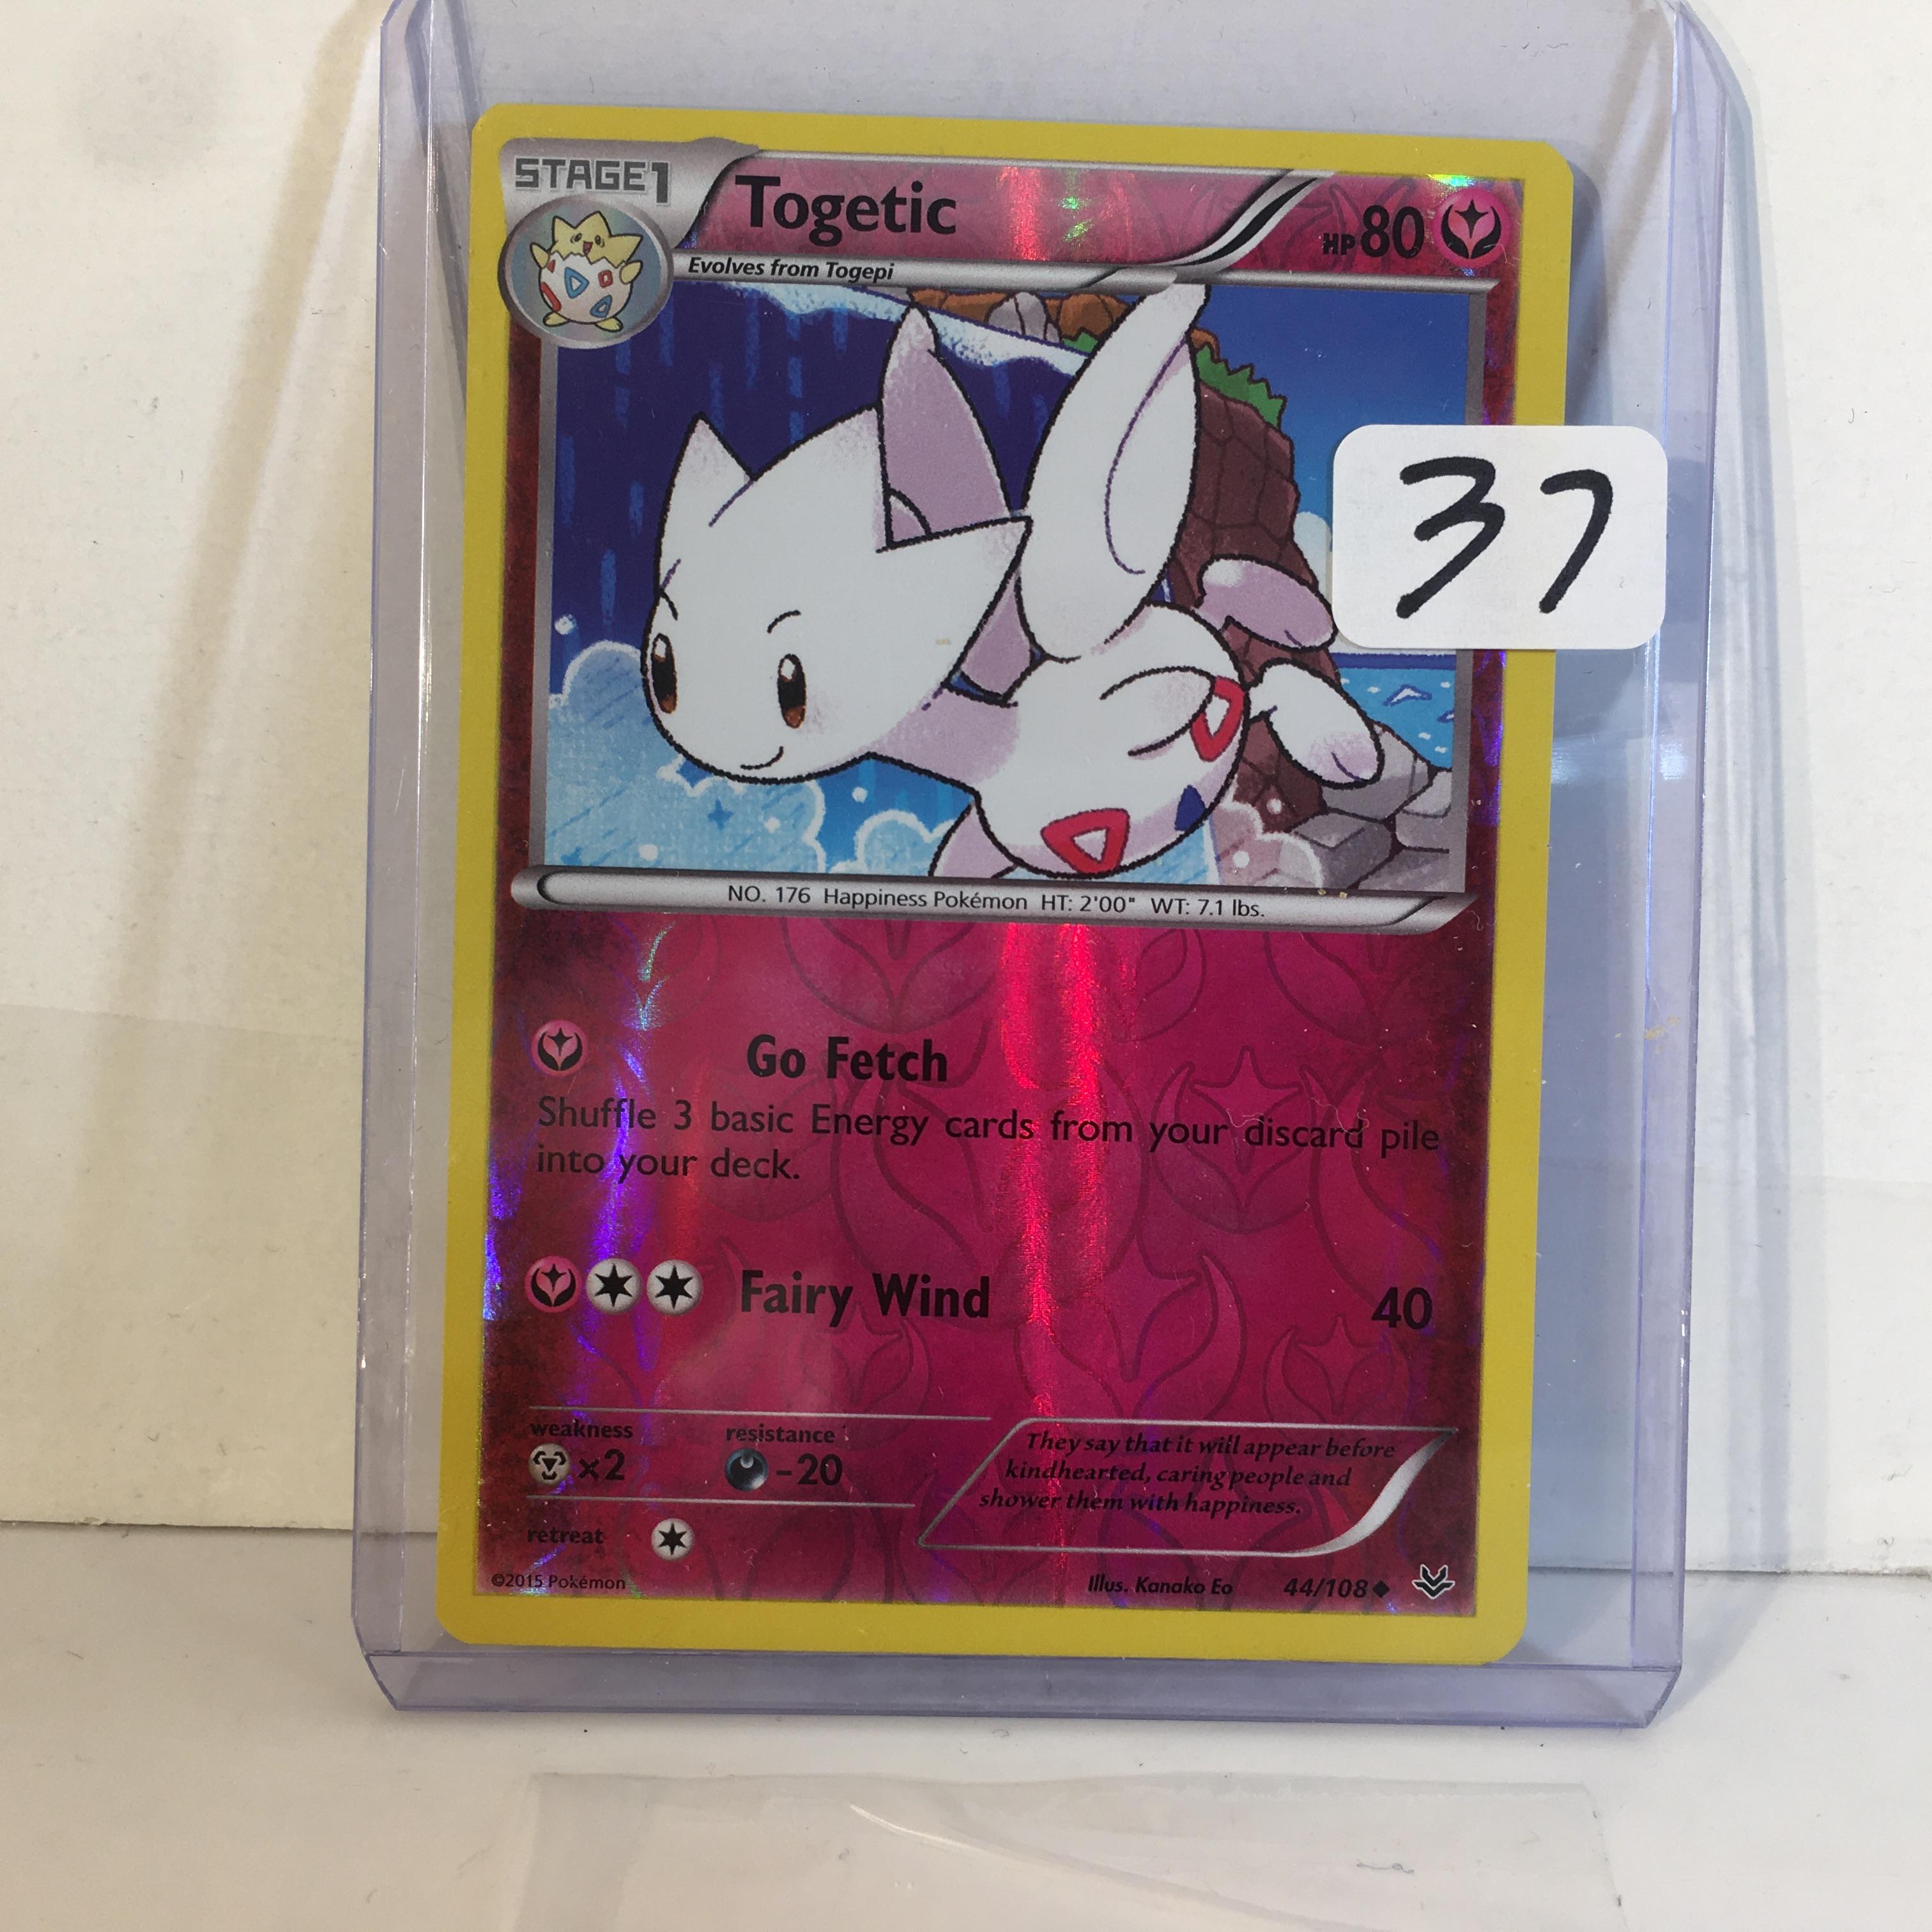 Collector Modern 2015 Pokemon TCG Stage1 Togetic HP80 Fairy Wind Trading Game Card 44/108